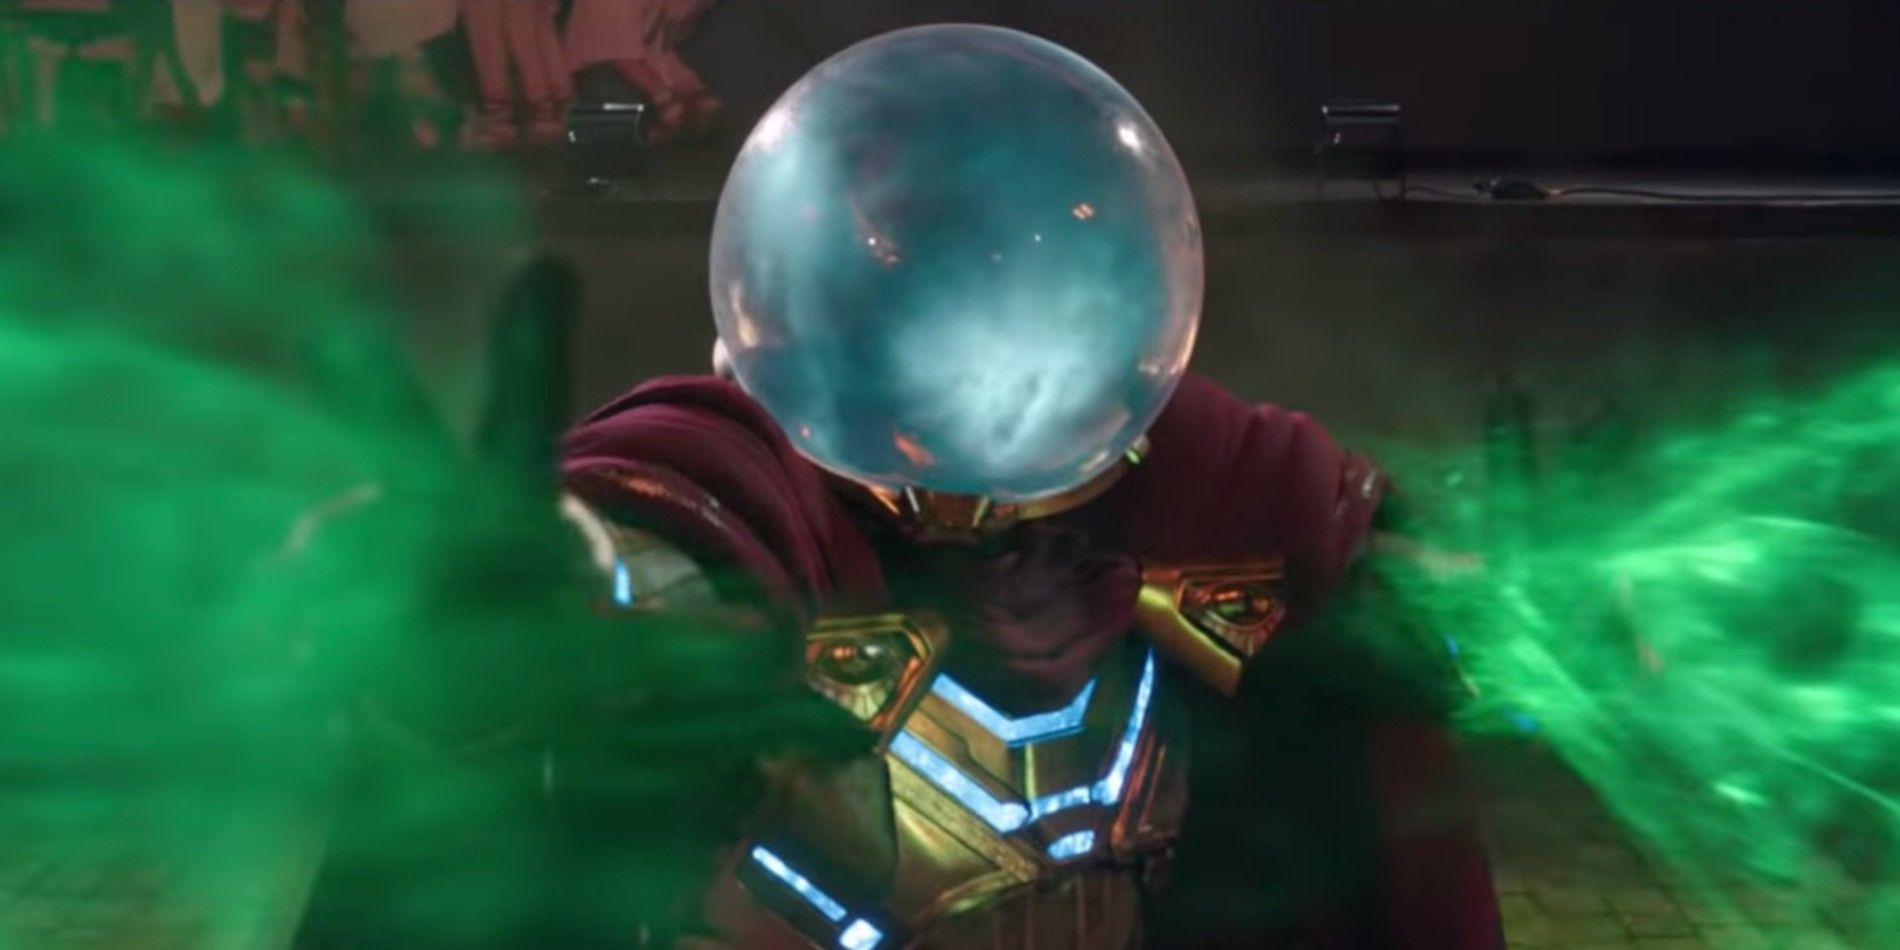 Mysterio doing illusions in Spider-Man Far From Home